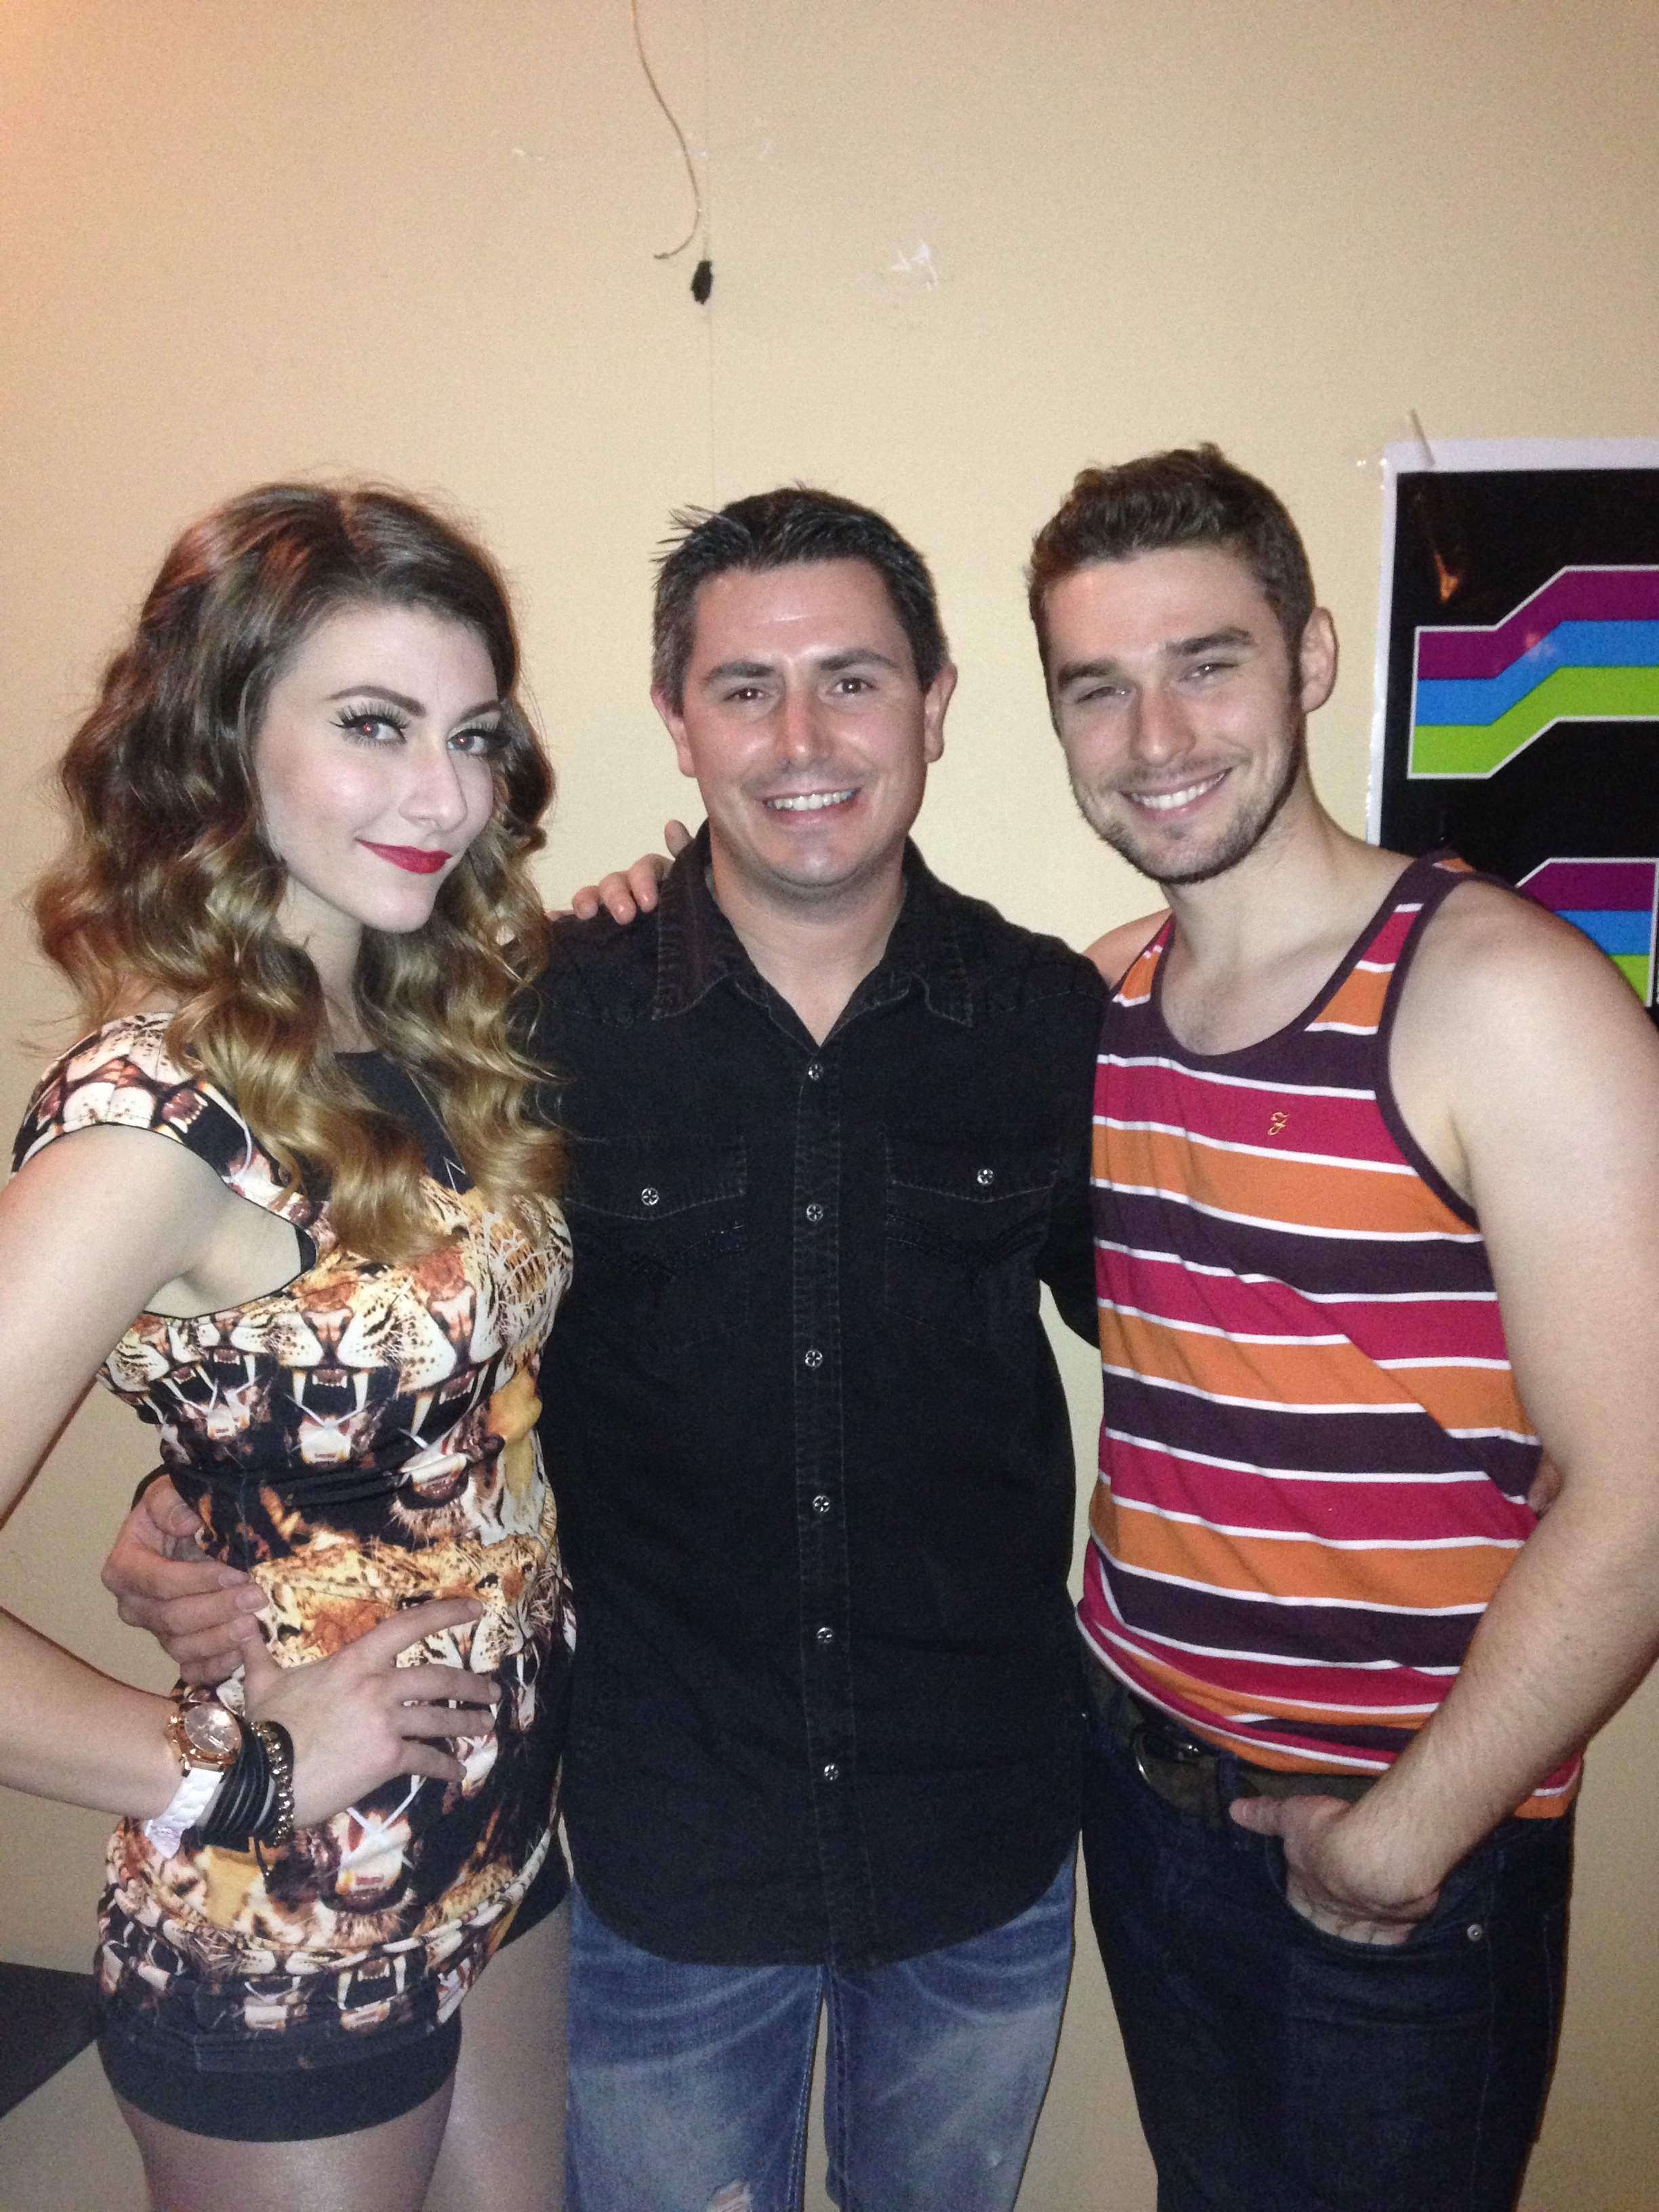 With NIck & Amy of Karmin. Ryan works with various national acts and management on projects, tour sponsors, and endorsements.